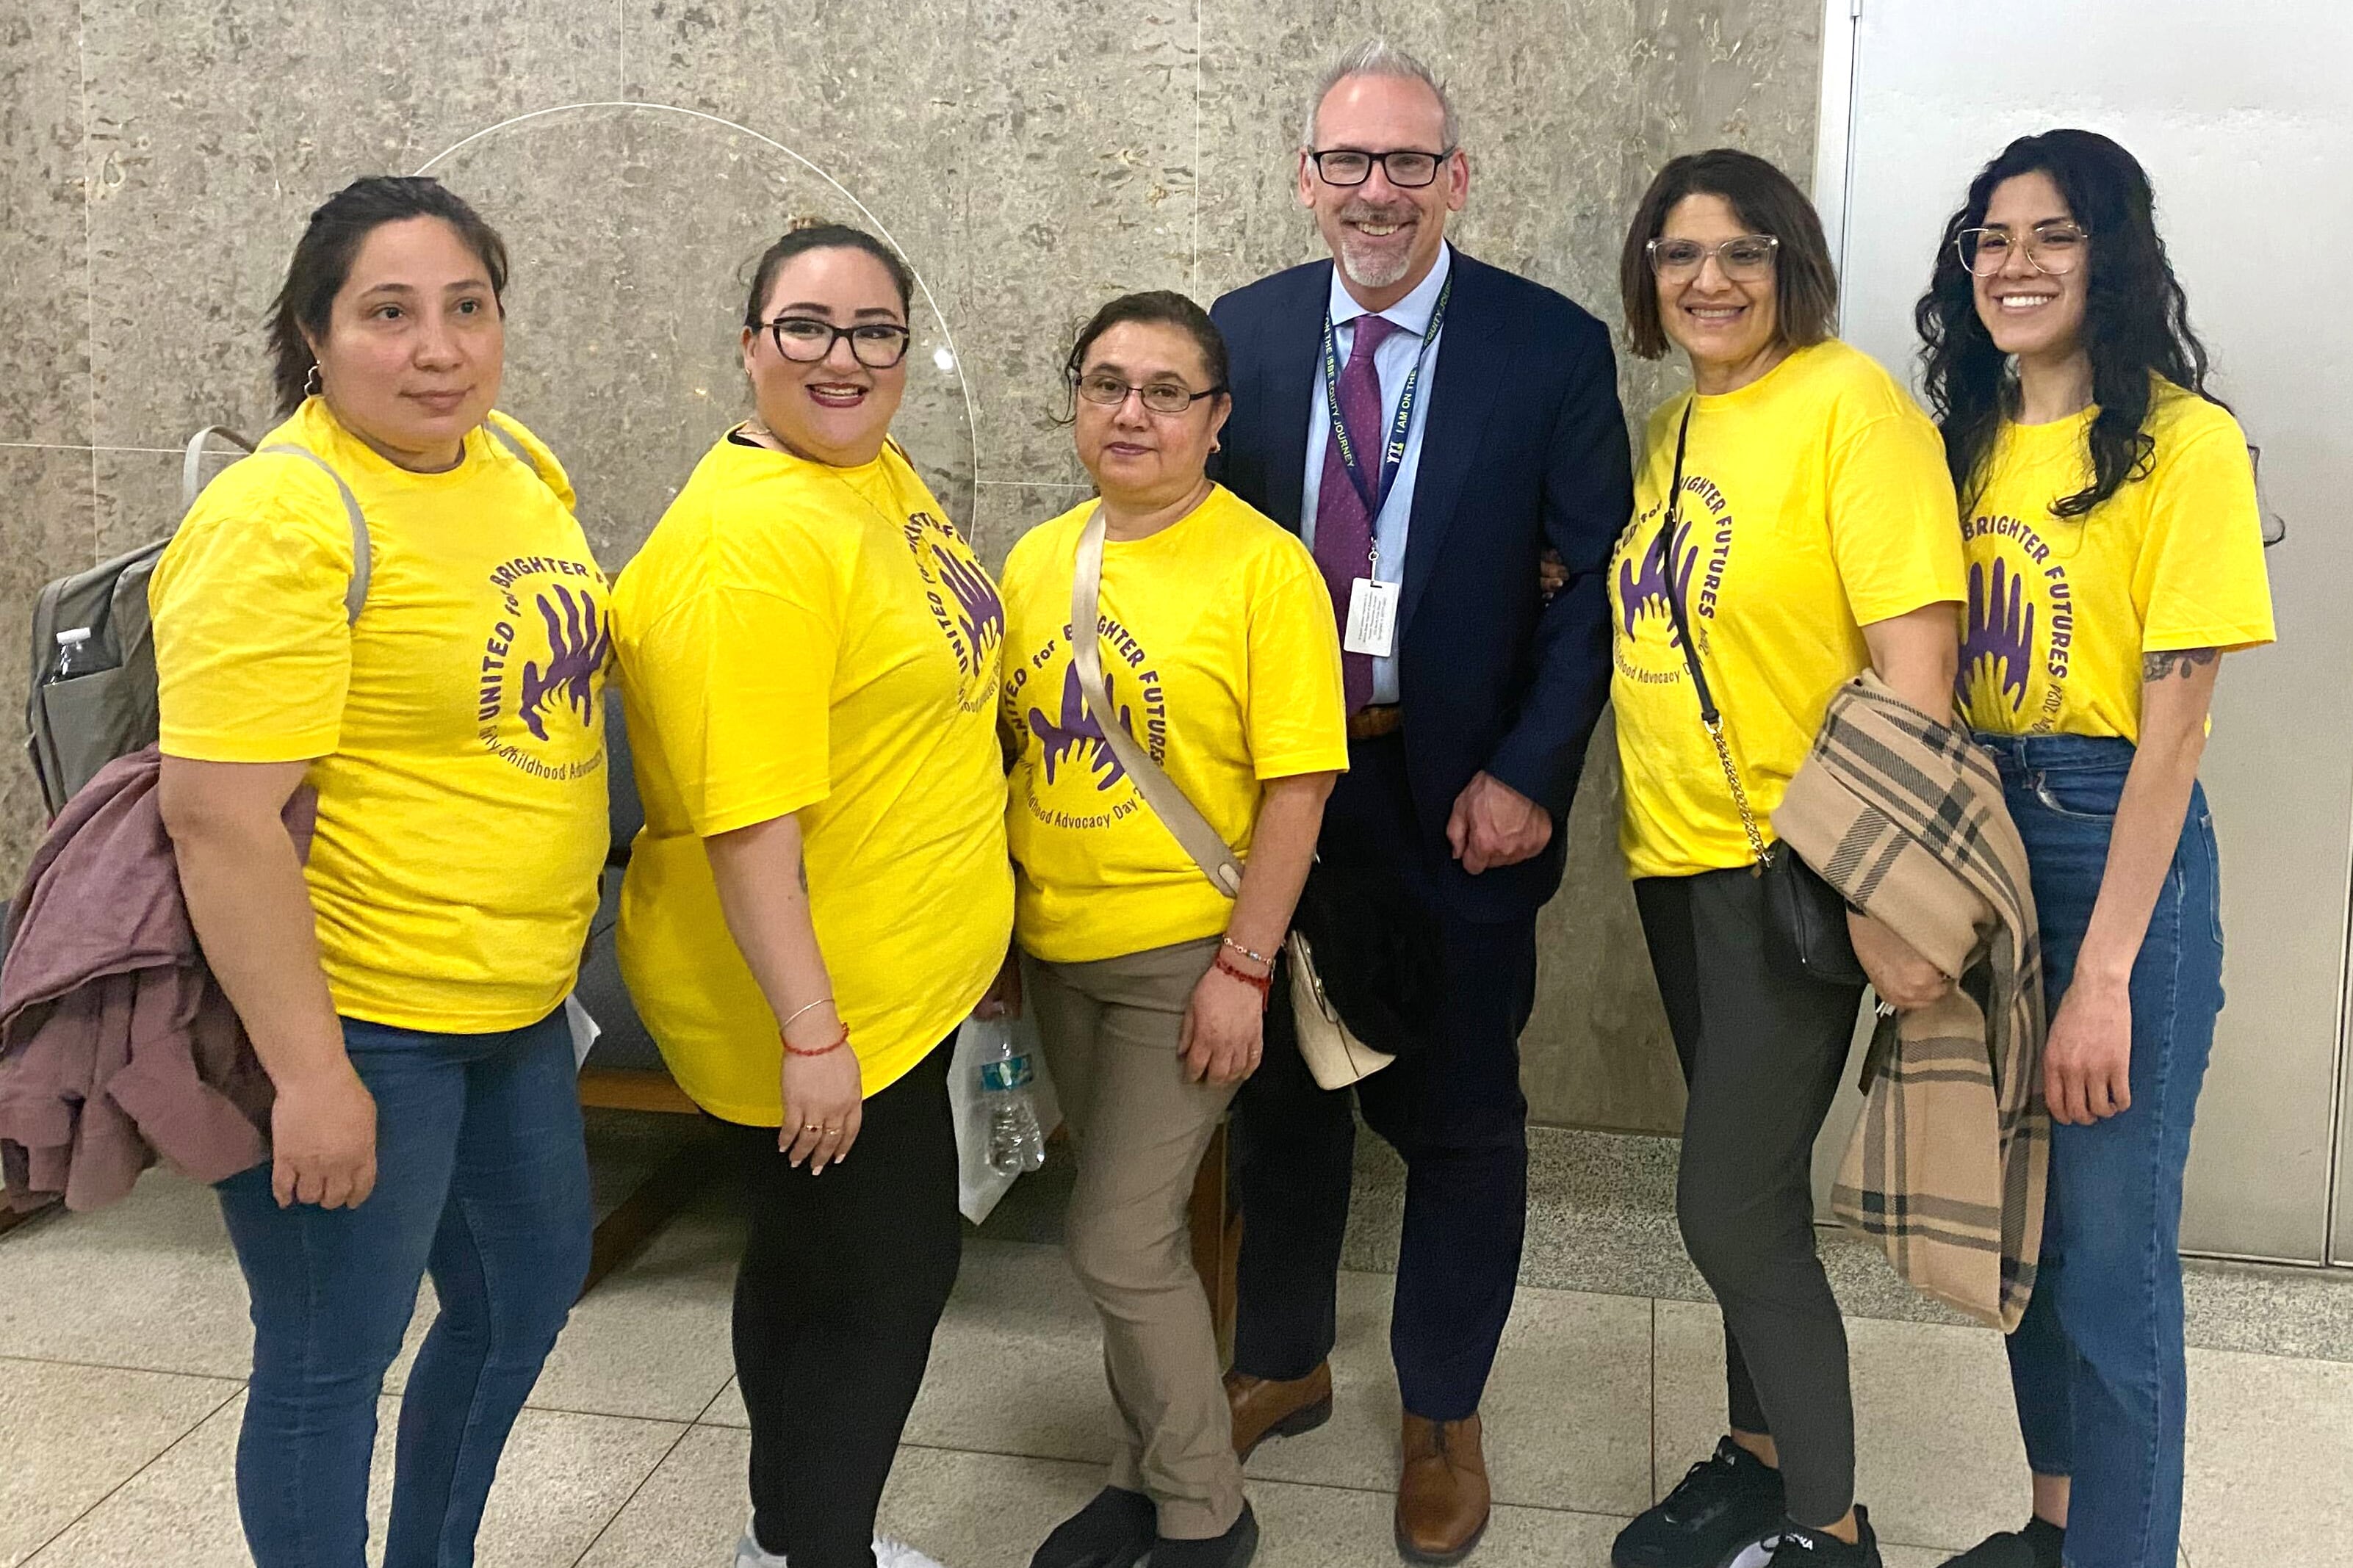 Five women in yellow t-shirts stand with a man in a suit.